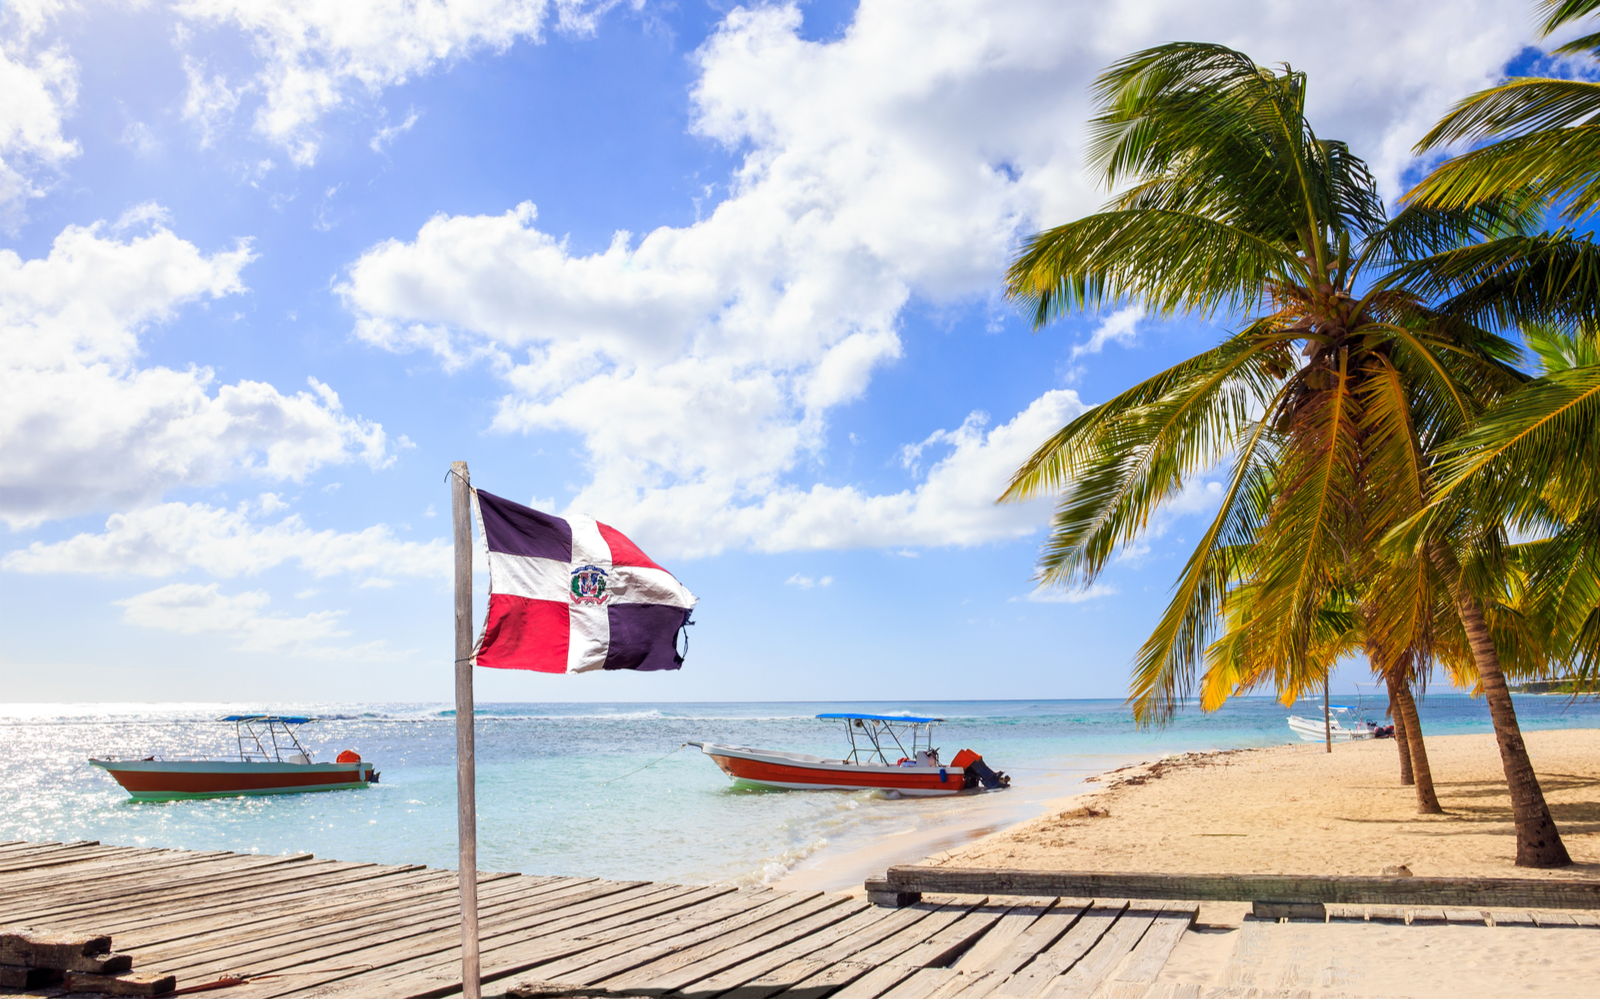 As a featured image for a piece on the best resorts in the Dominican Republic, Caribbean beach and Dominican Republic flag on Saona island